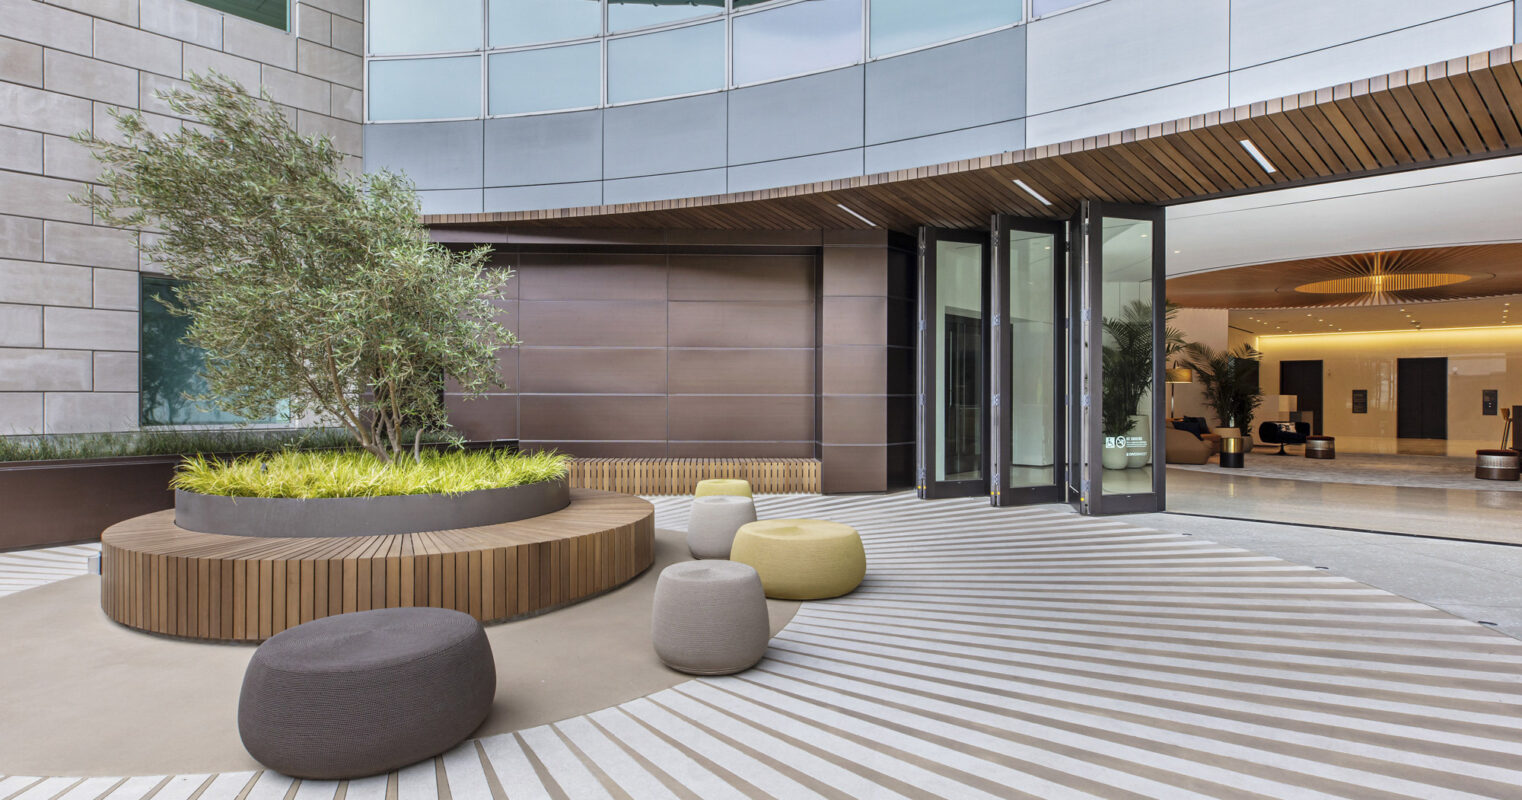 Modern office lobby with a minimalist design featuring a combination of natural and geometric elements. A central, circular wooden seating area incorporates greenery, surrounded by parallel stone tiles and contrasting soft, rounded poufs. Clean lines and a glass facade allow natural light to accentuate the space's textures and materials.